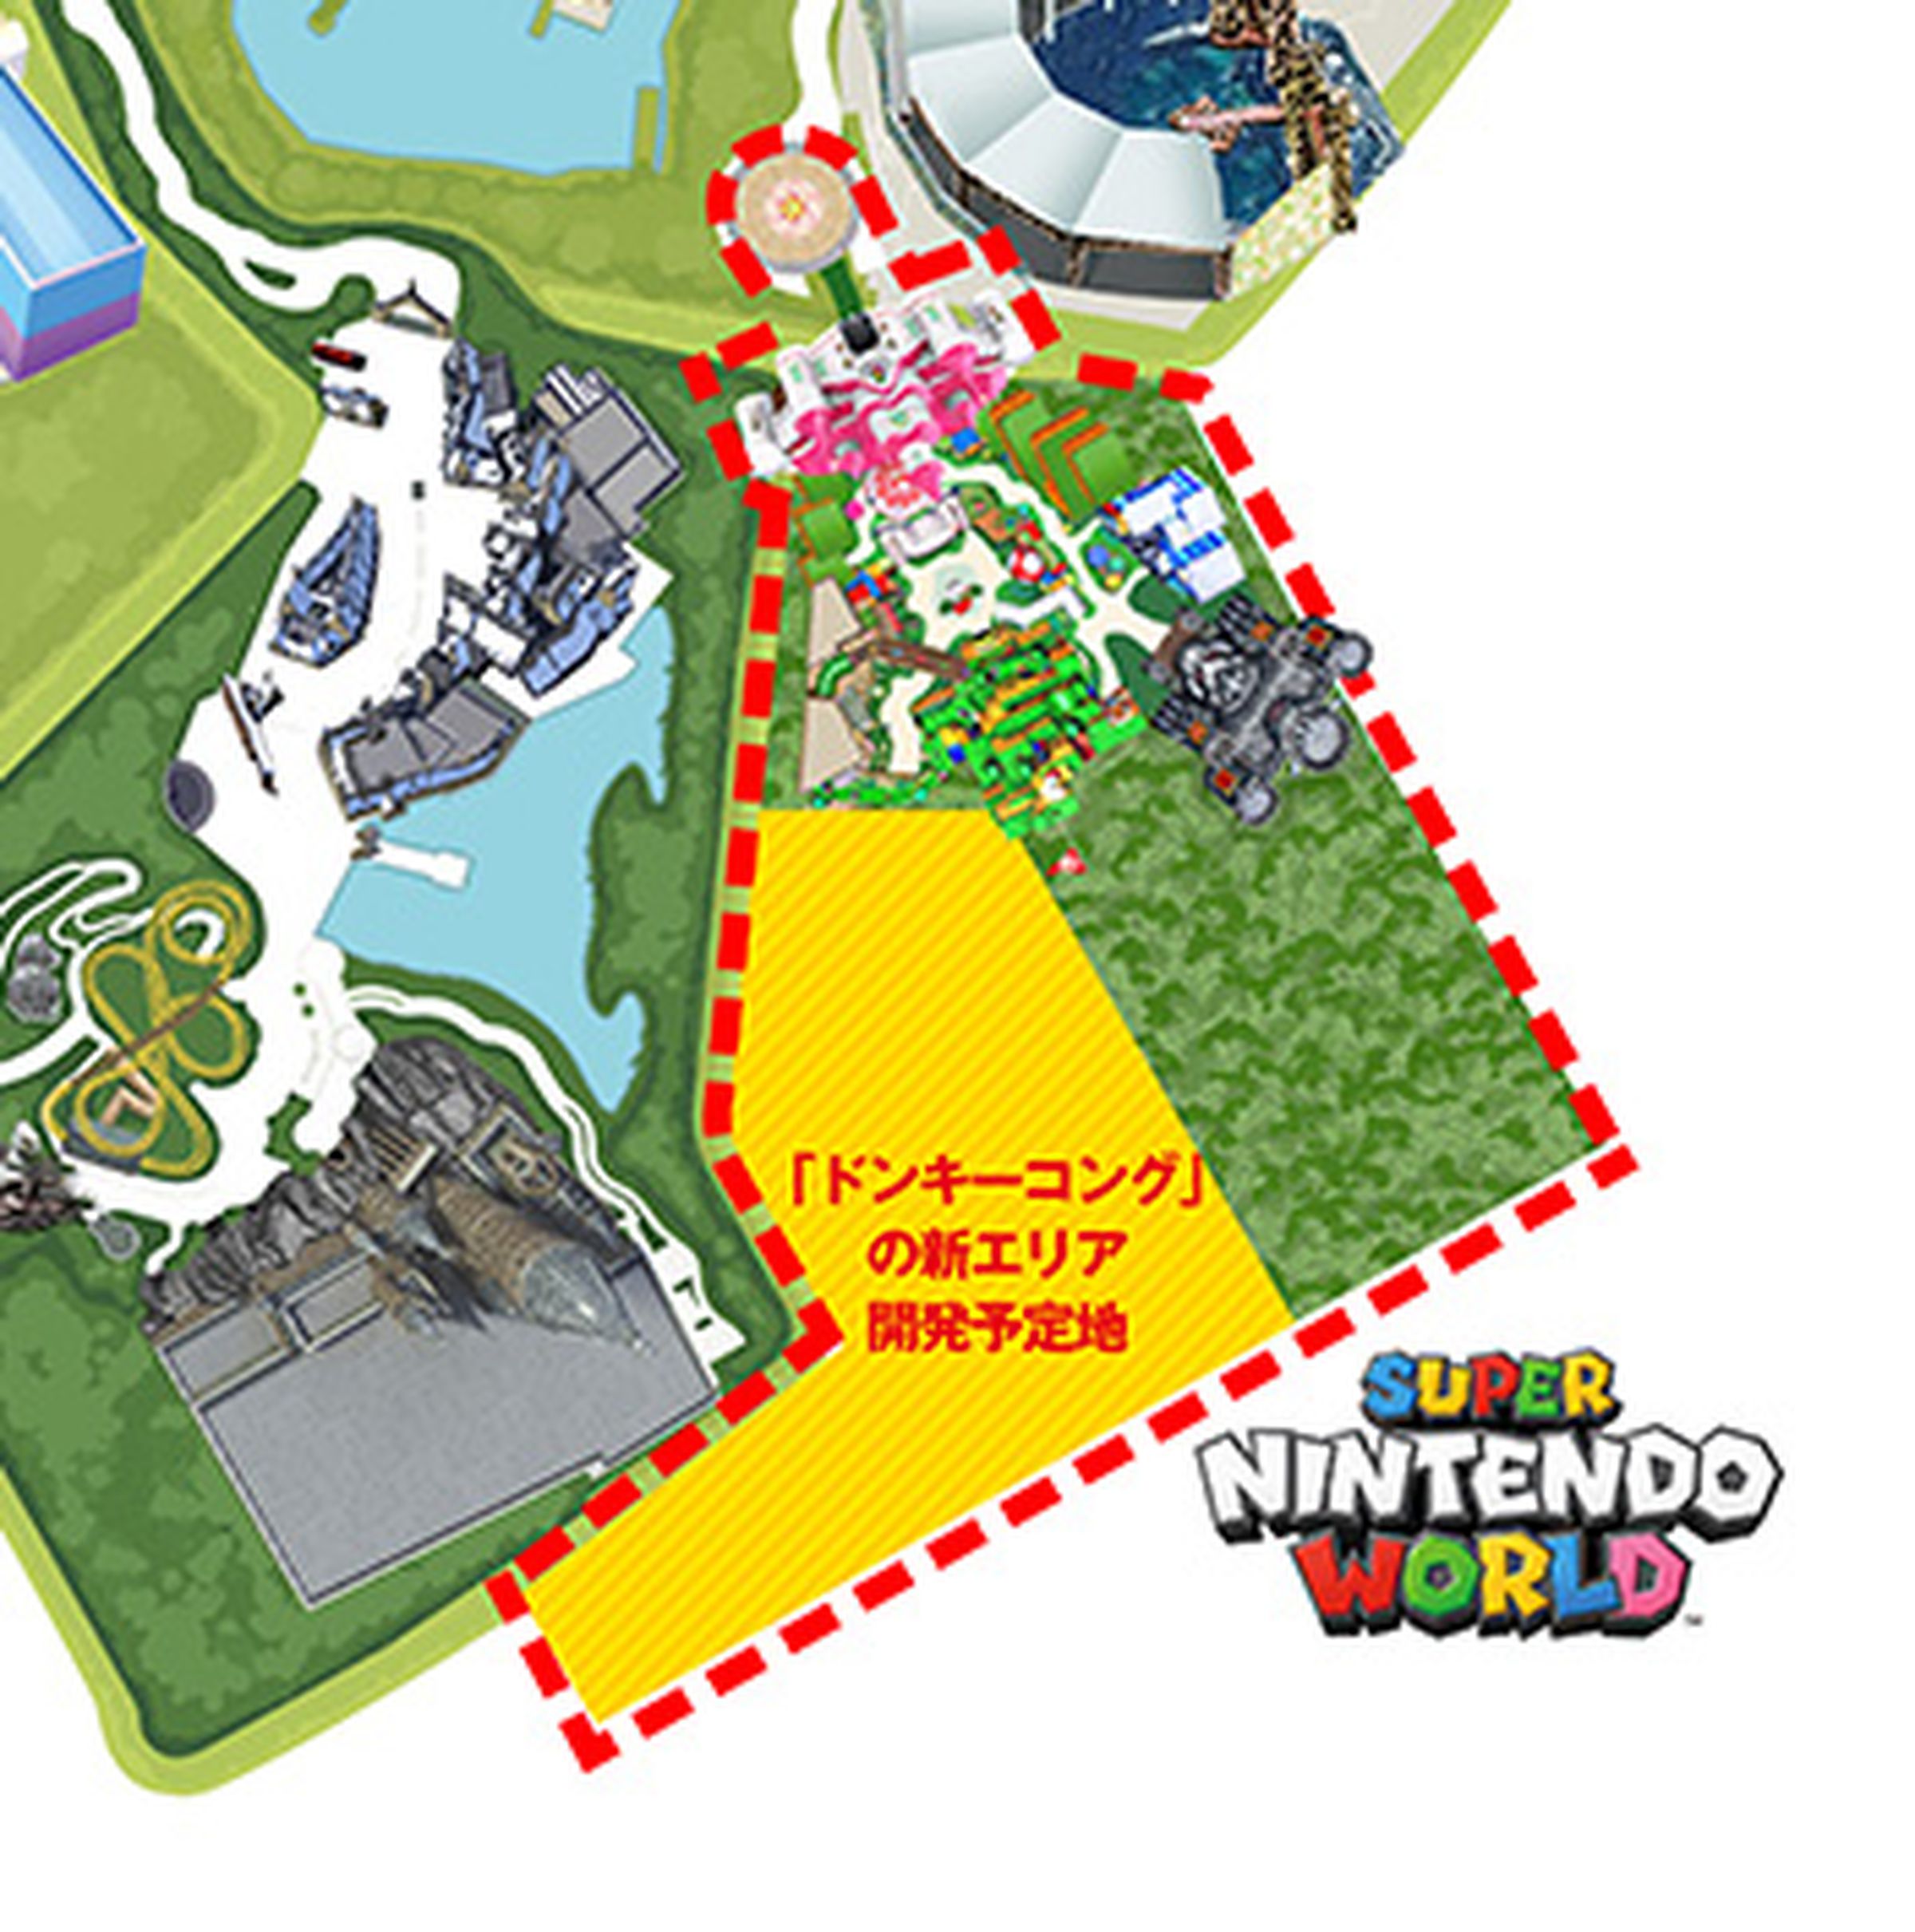 A map showing the location of the new Donkey Kong area within Super Nintendo World.